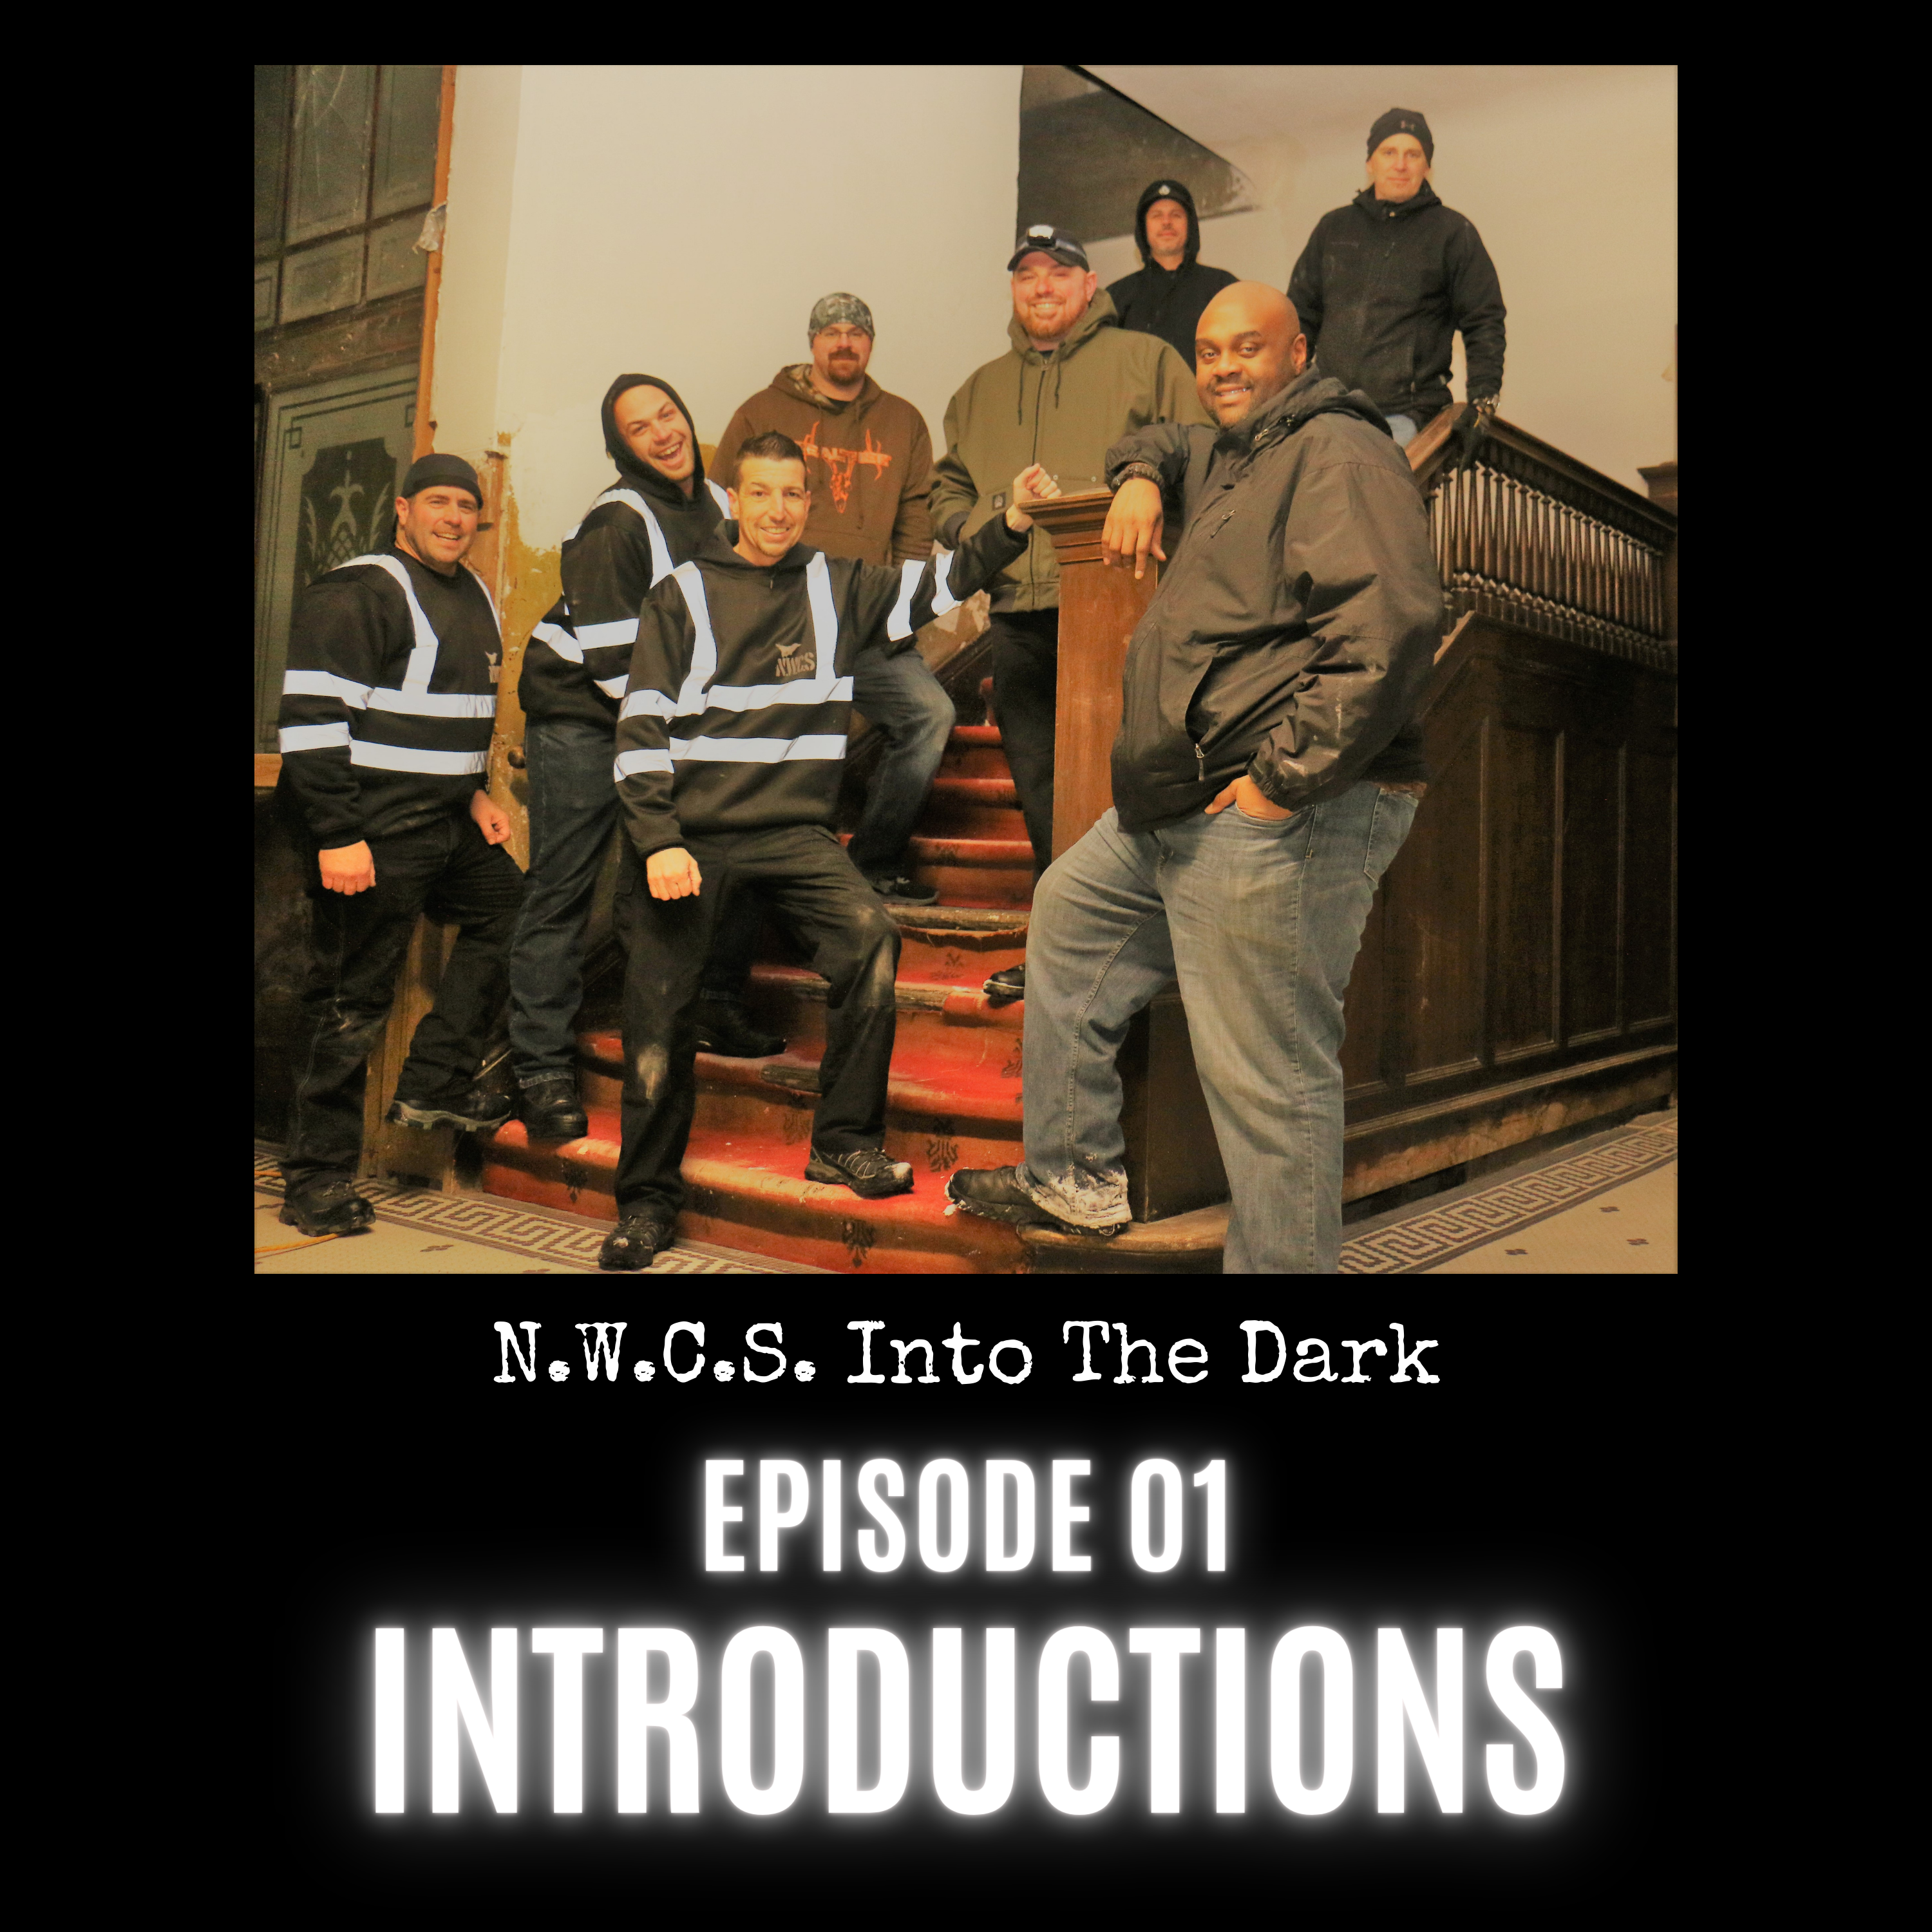 N.W.C.S. - Into The Dark Episode 01 Introductions